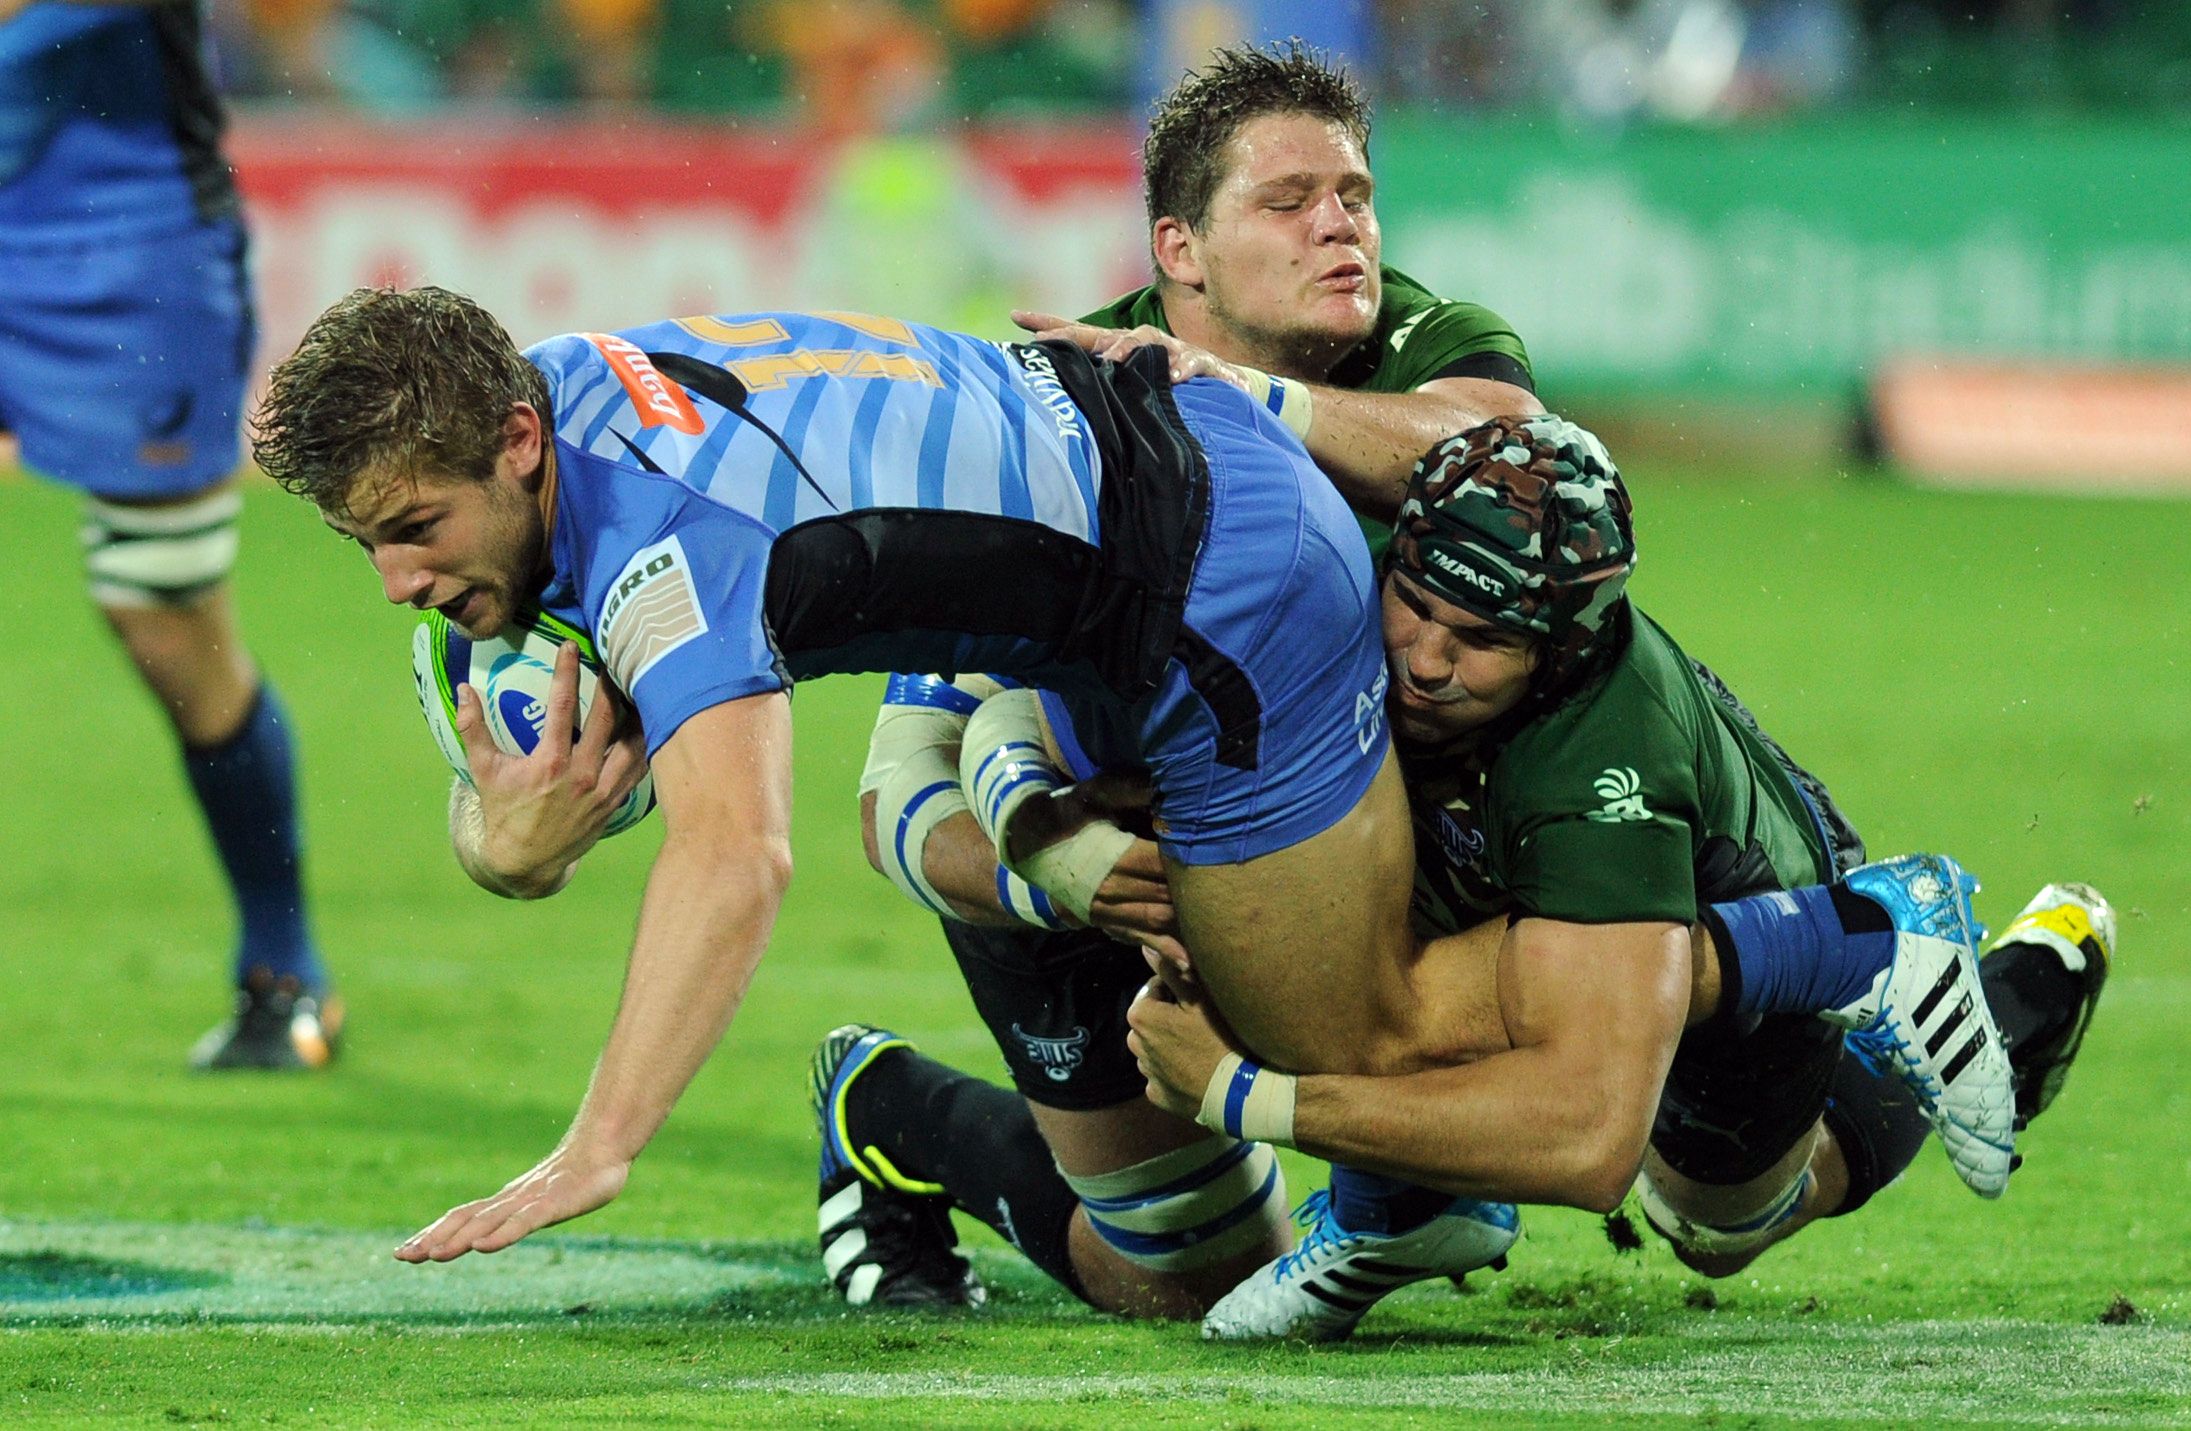 The Western Force's Kyle Goodwin is brought down in a tackle during the match against the Bulls in Perth. Photo: AFP